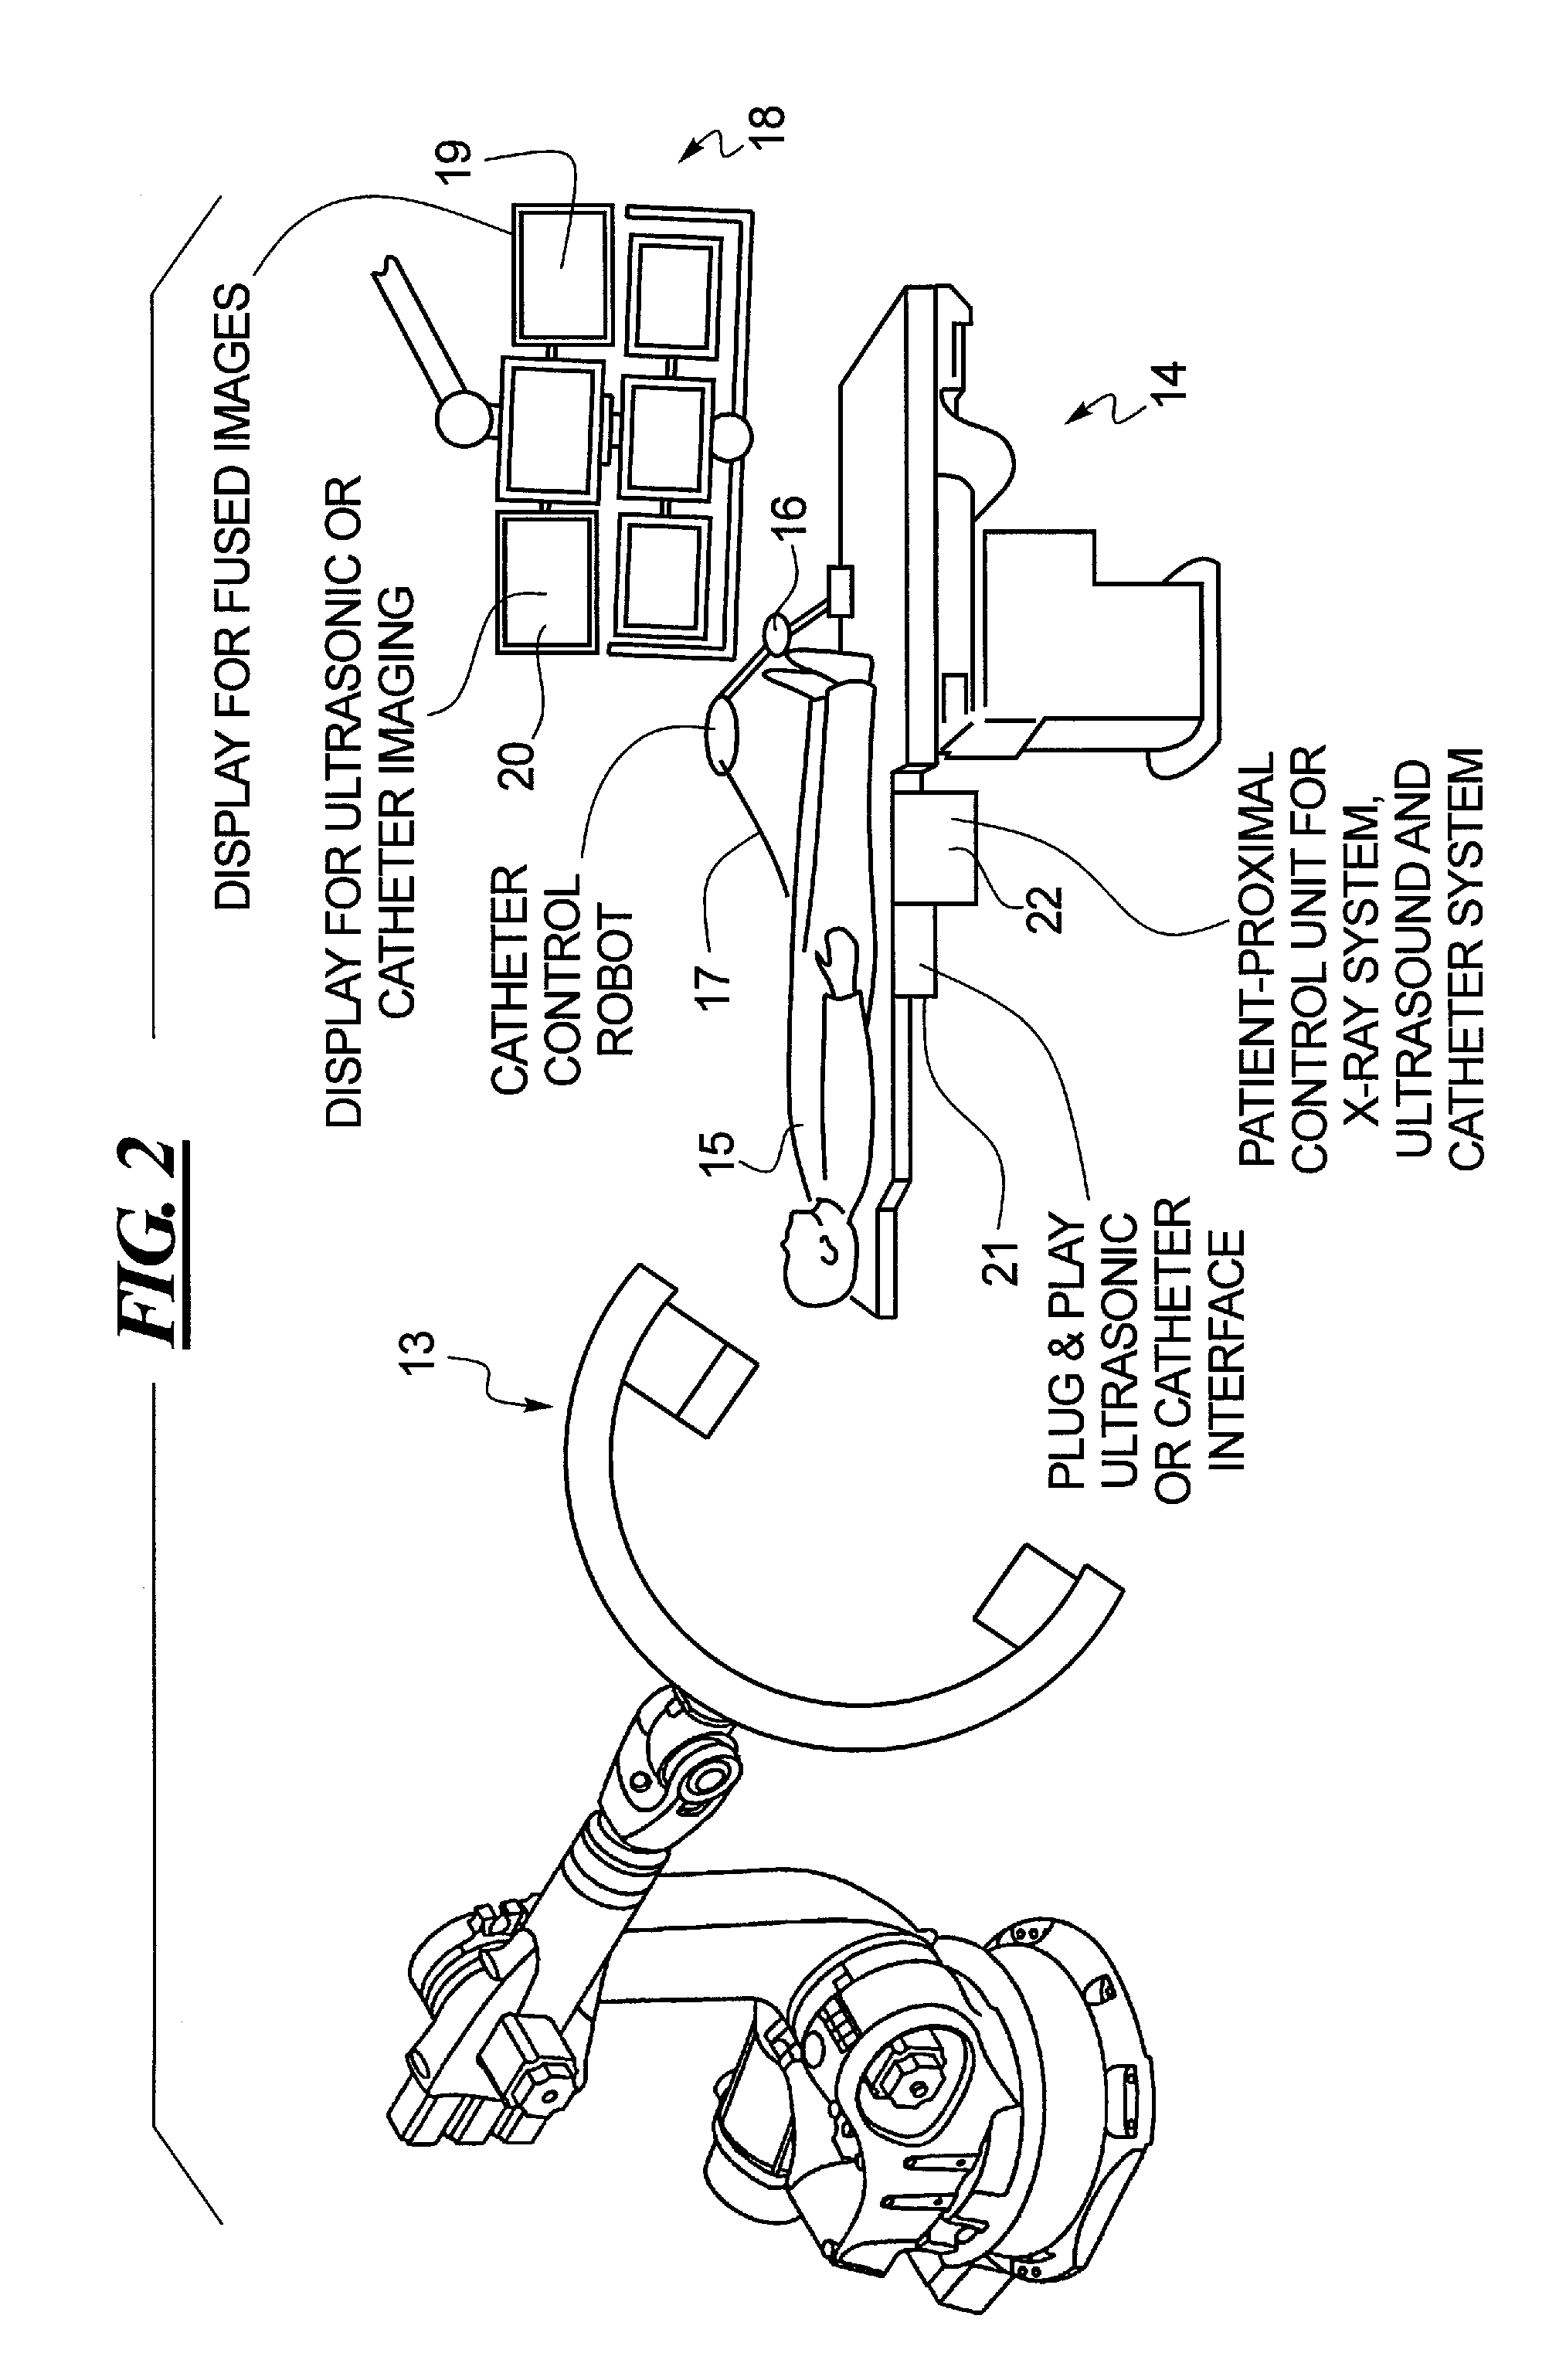 Method and apparatus for conducting an interventional procedure involving heart valves using a robot-based x-ray device